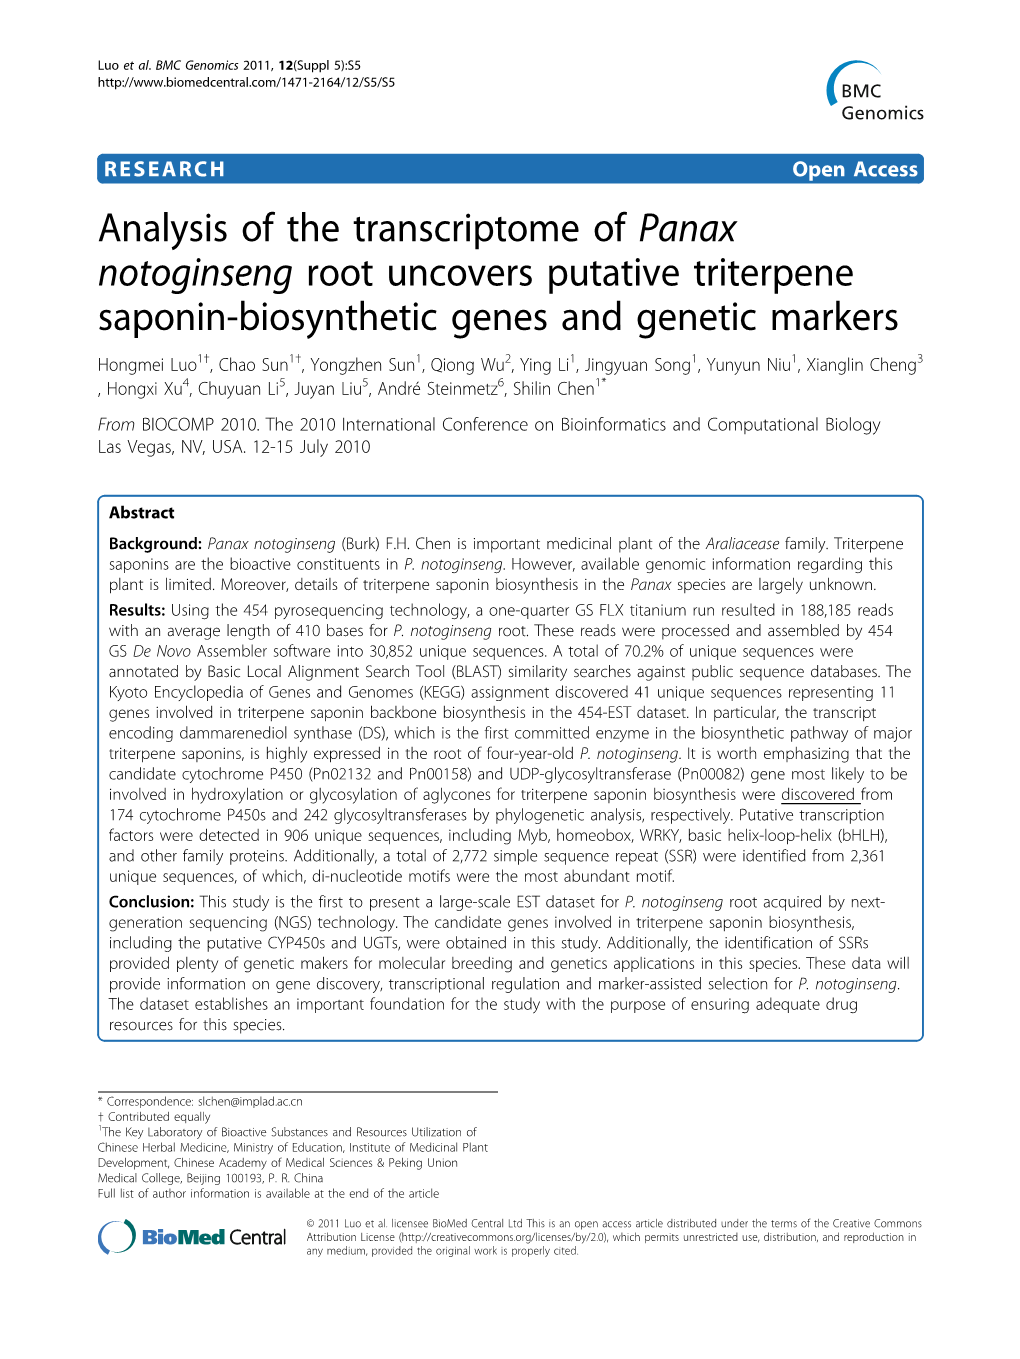 Analysis of the Transcriptome of Panax Notoginseng Root Uncovers Putative